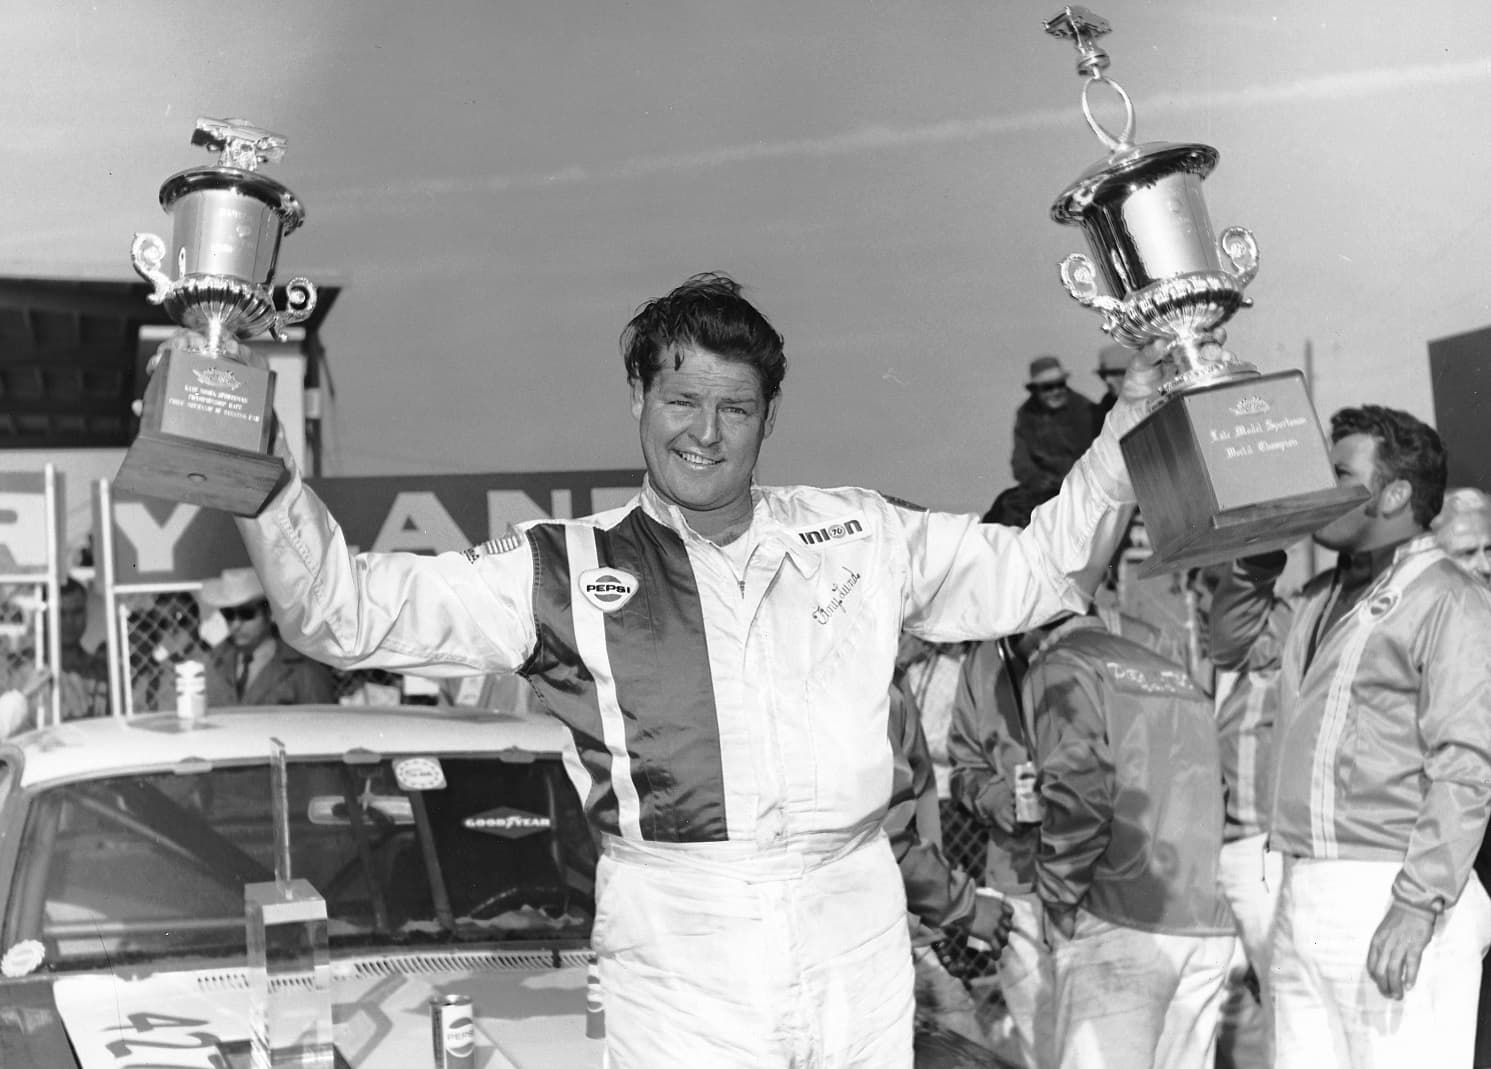 Tiny Lund in Victory Lane after he drove Bondy Long's Ford Fairlane to victory in the Permatex 300 at Daytona International Speedway for Late Model Sportsman cars.